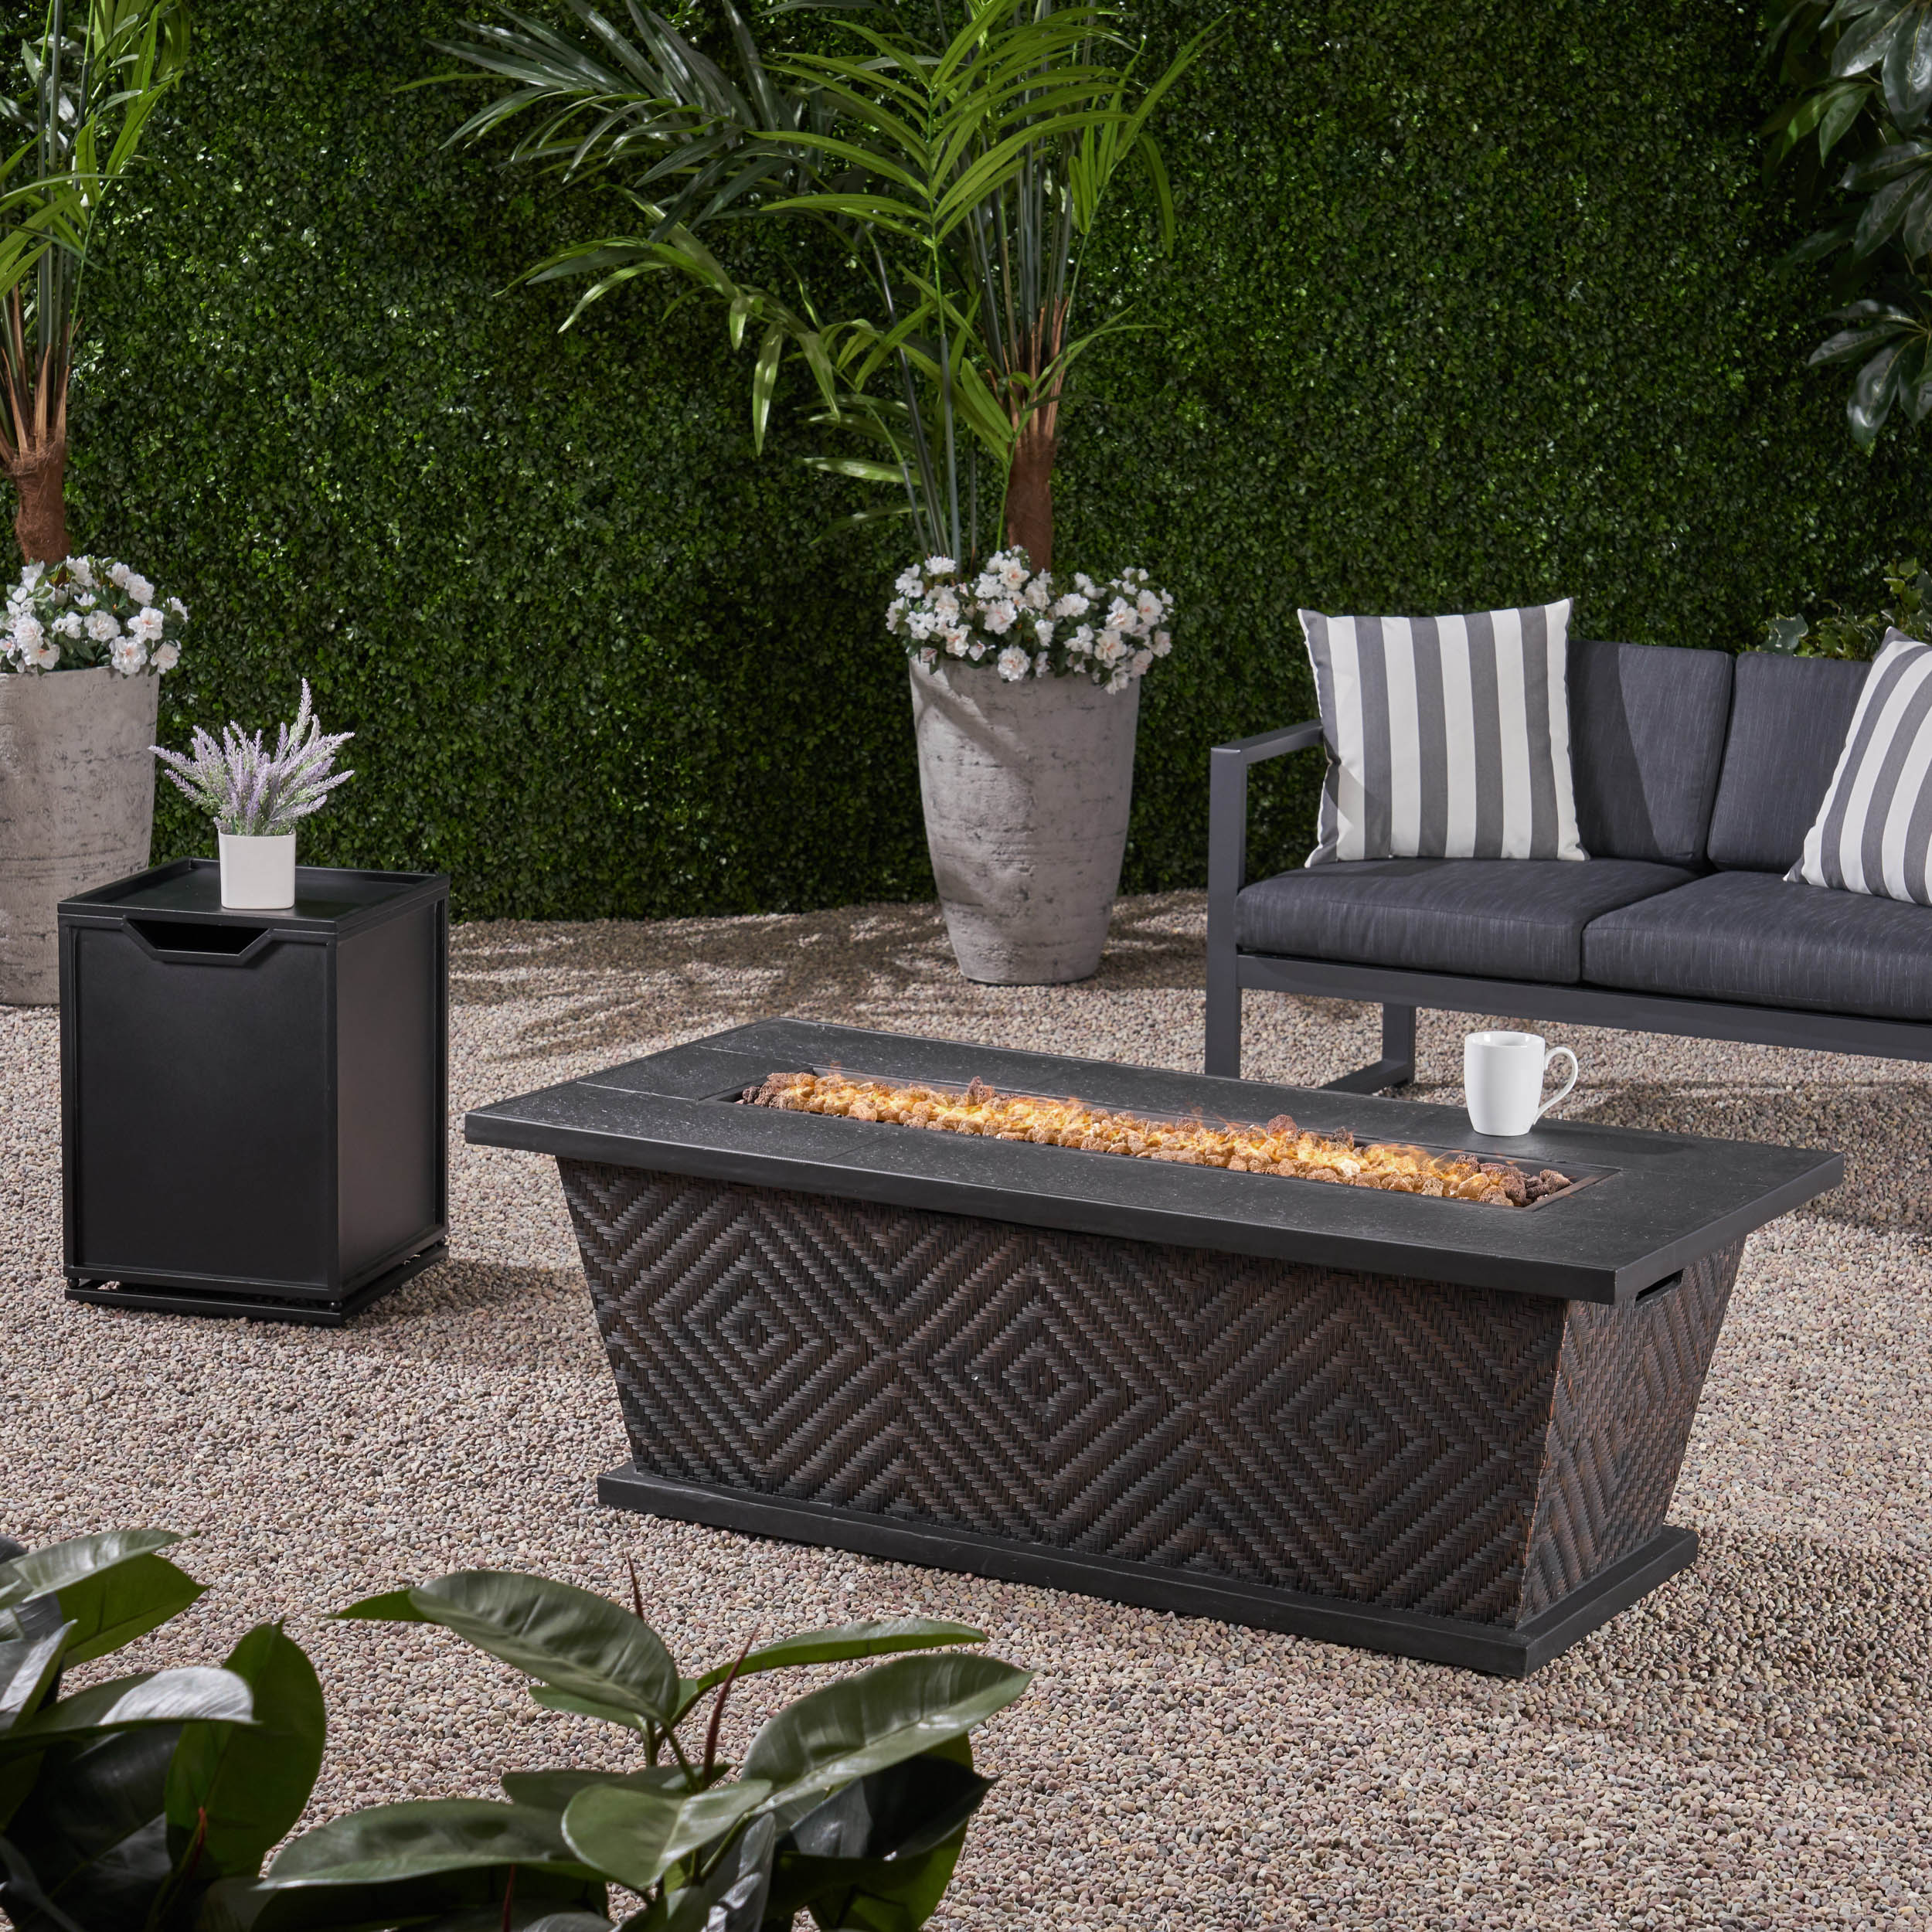 Anahi Outdoor 56 Inch Light Weight Concrete Rectangular Fire Pit, Brown, Black - image 1 of 6